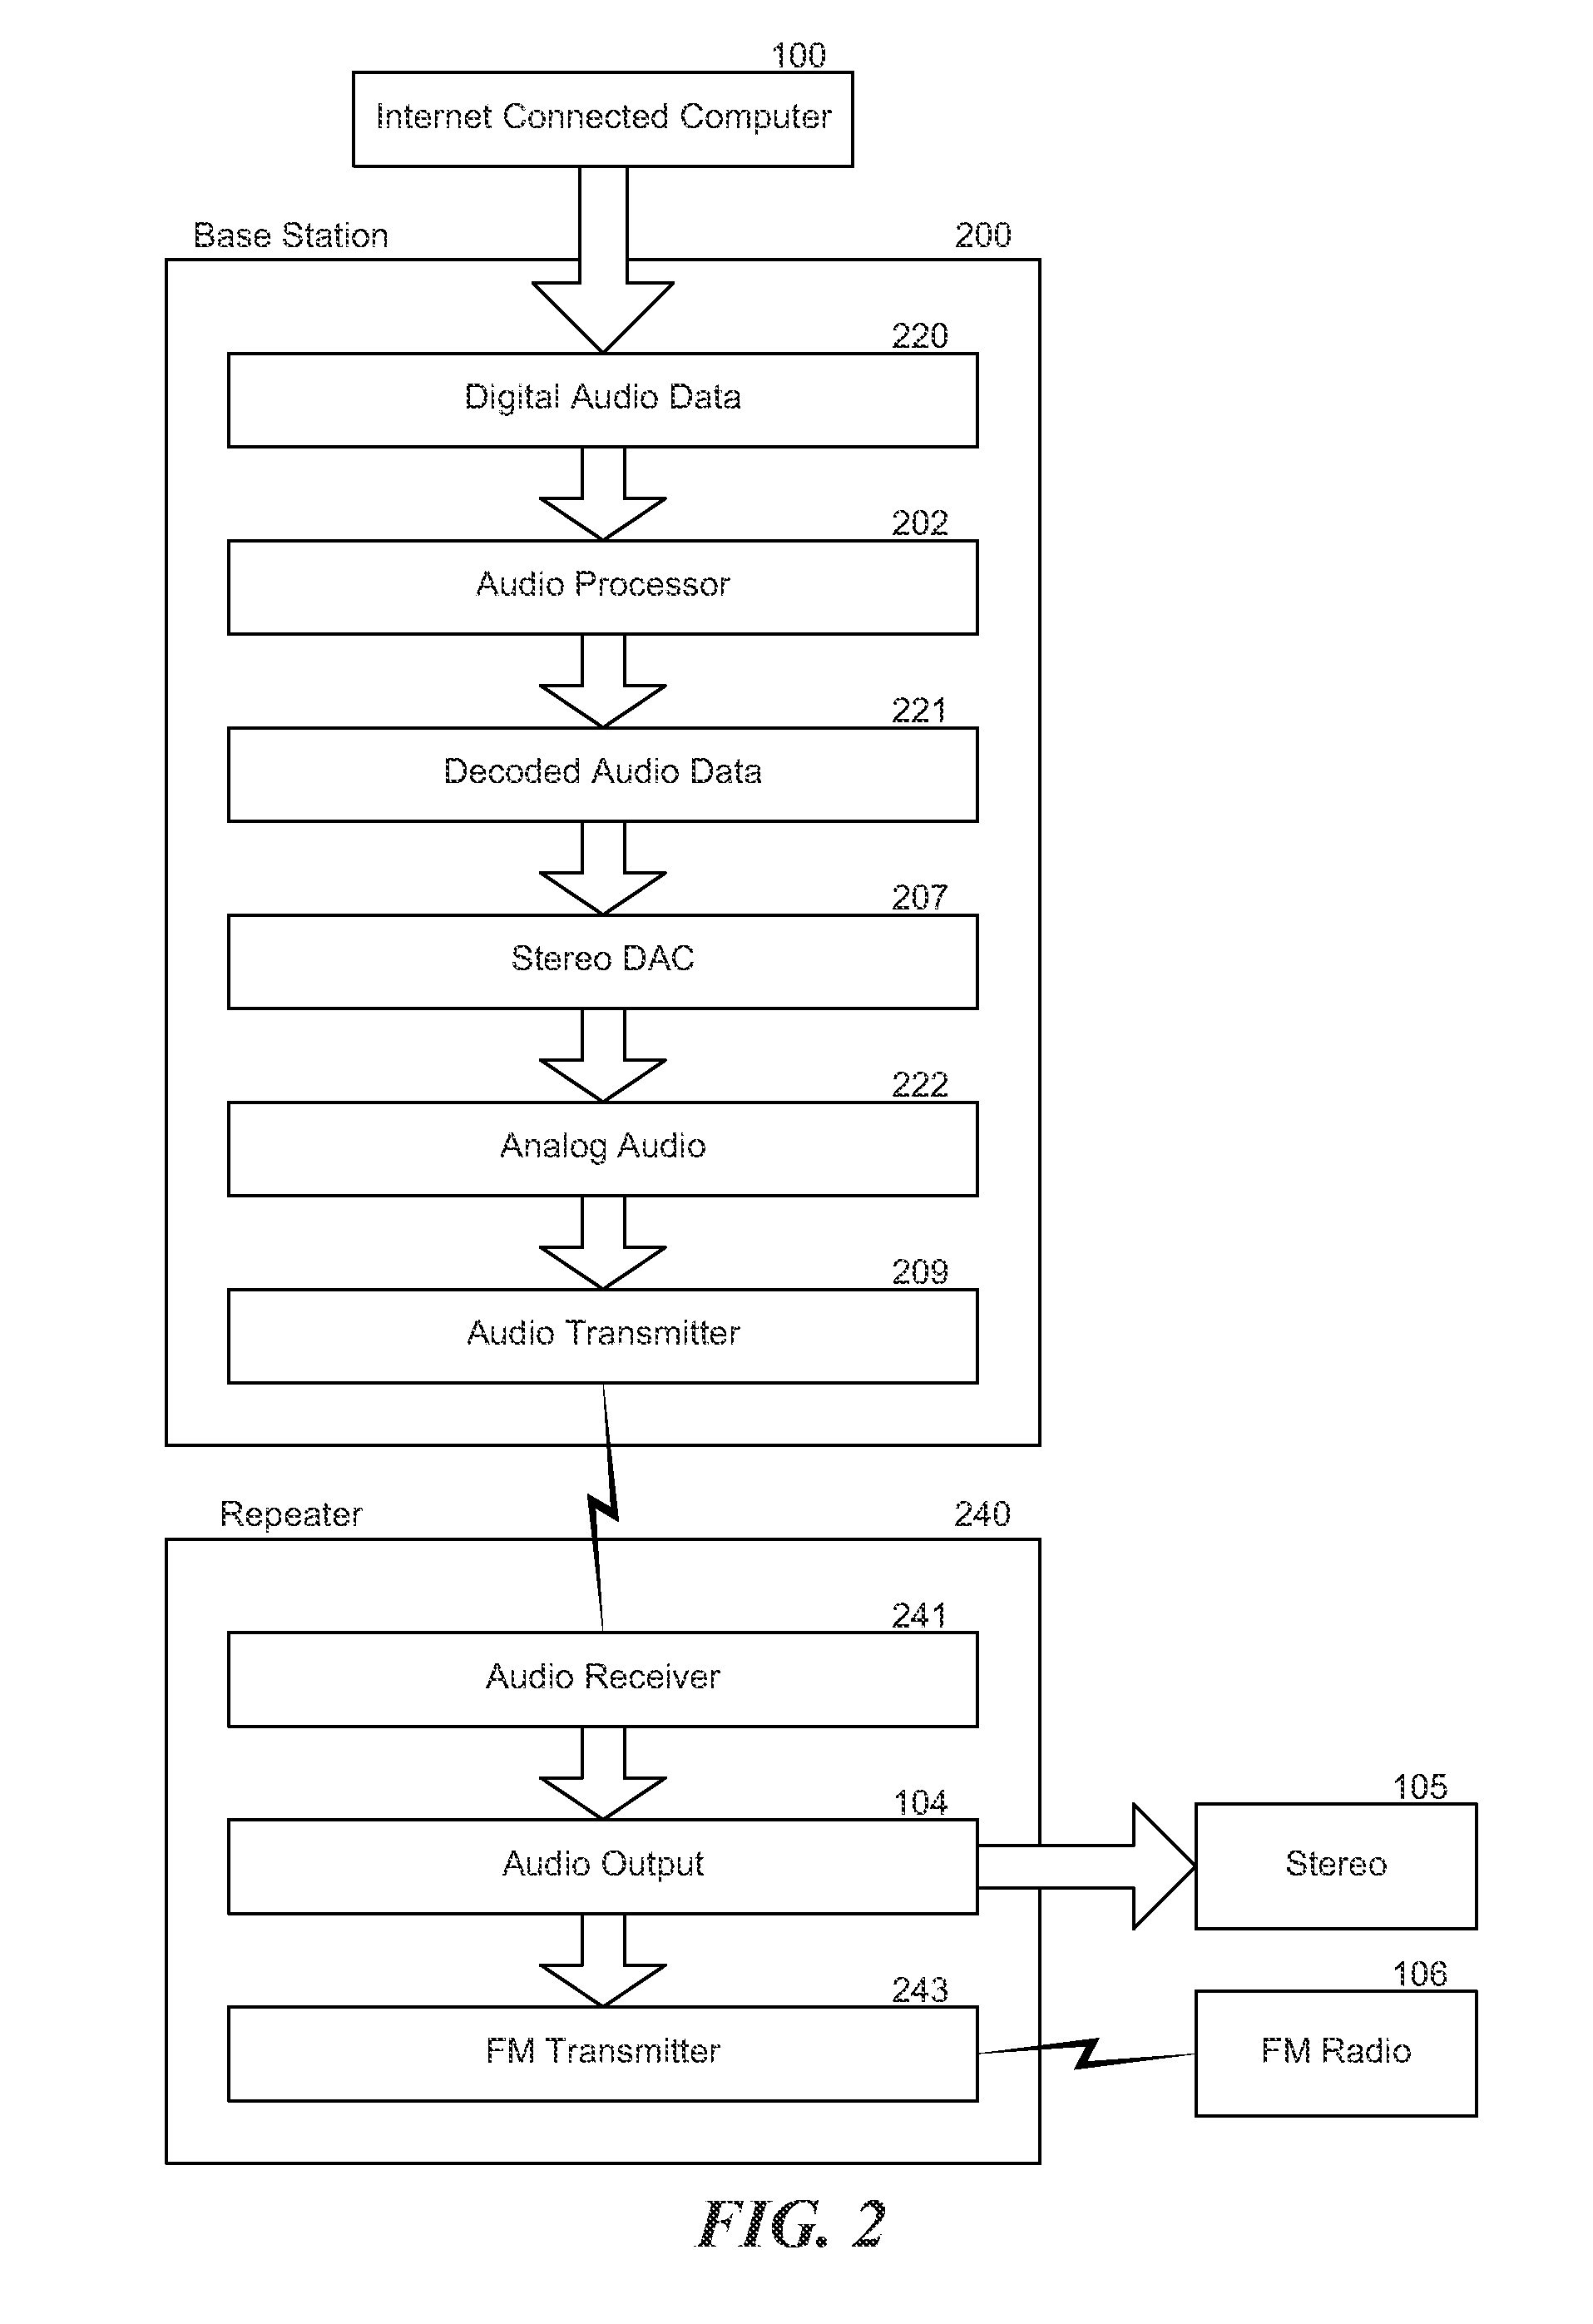 Structure and method for selecting, controlling and sending internet-based or local digital audio to an am/fm radio or analog amplifier